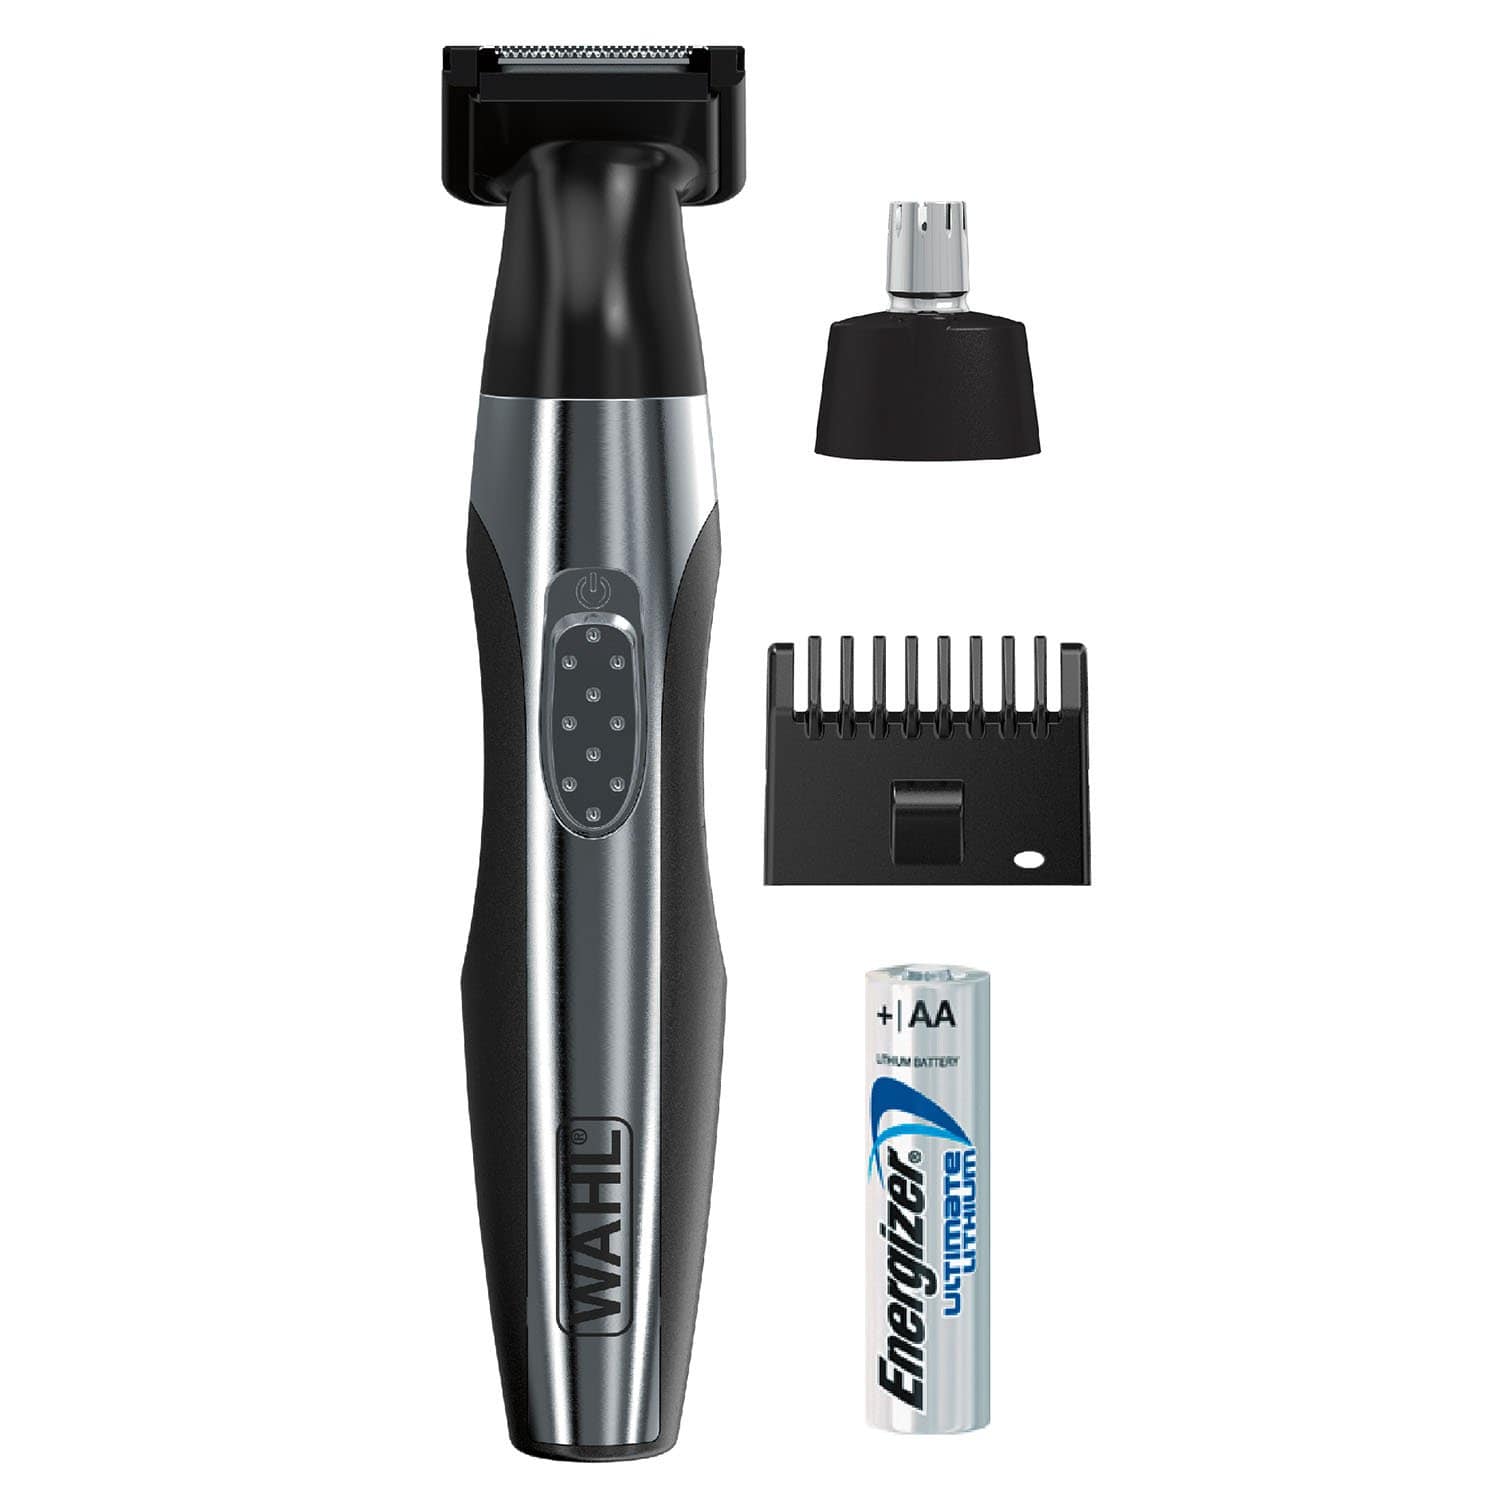 WAHL LITHIUM QUICK STYLE ALL-IN-ONE WET/DRY TRIMMER - 5604-035